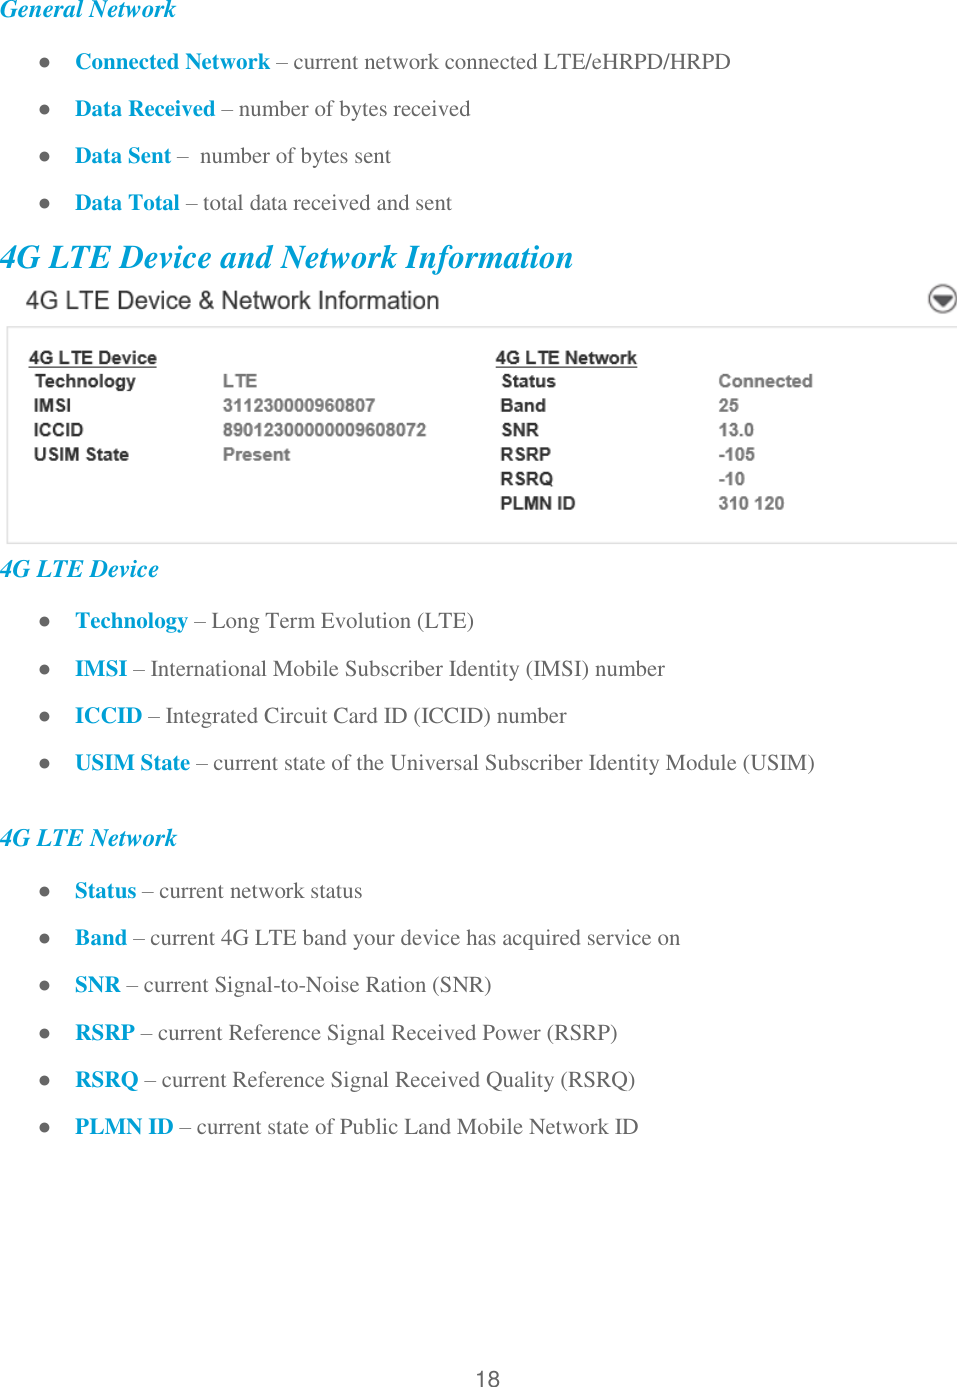 18  General Network ● Connected Network – current network connected LTE/eHRPD/HRPD  ● Data Received – number of bytes received ● Data Sent –  number of bytes sent ● Data Total – total data received and sent 4G LTE Device and Network Information  4G LTE Device ● Technology – Long Term Evolution (LTE) ● IMSI – International Mobile Subscriber Identity (IMSI) number ● ICCID – Integrated Circuit Card ID (ICCID) number ● USIM State – current state of the Universal Subscriber Identity Module (USIM)  4G LTE Network ● Status – current network status ● Band – current 4G LTE band your device has acquired service on ● SNR – current Signal-to-Noise Ration (SNR) ● RSRP – current Reference Signal Received Power (RSRP) ● RSRQ – current Reference Signal Received Quality (RSRQ) ● PLMN ID – current state of Public Land Mobile Network ID   